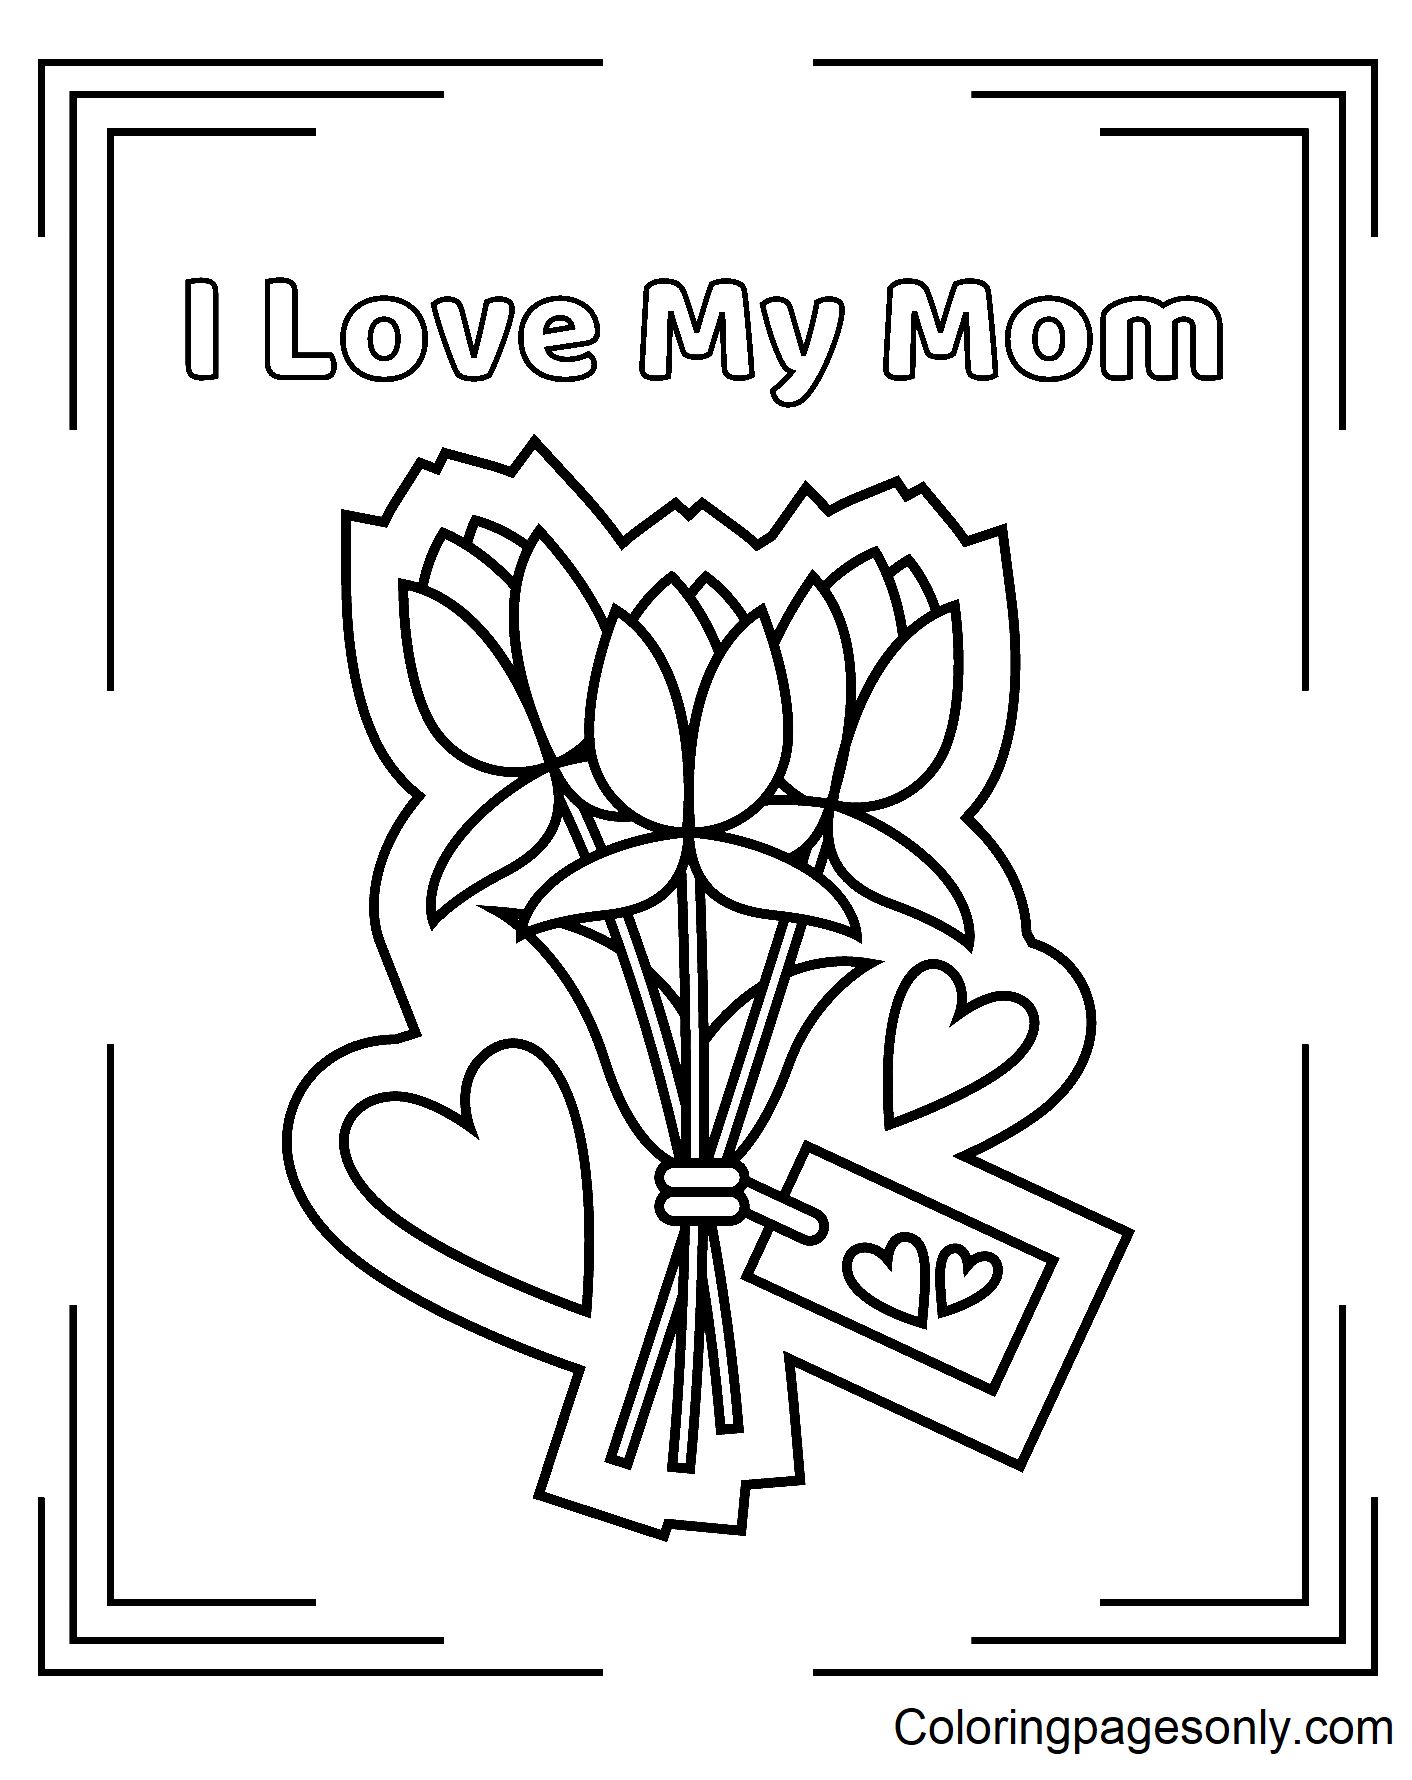 I Love My Mom Coloring Pages